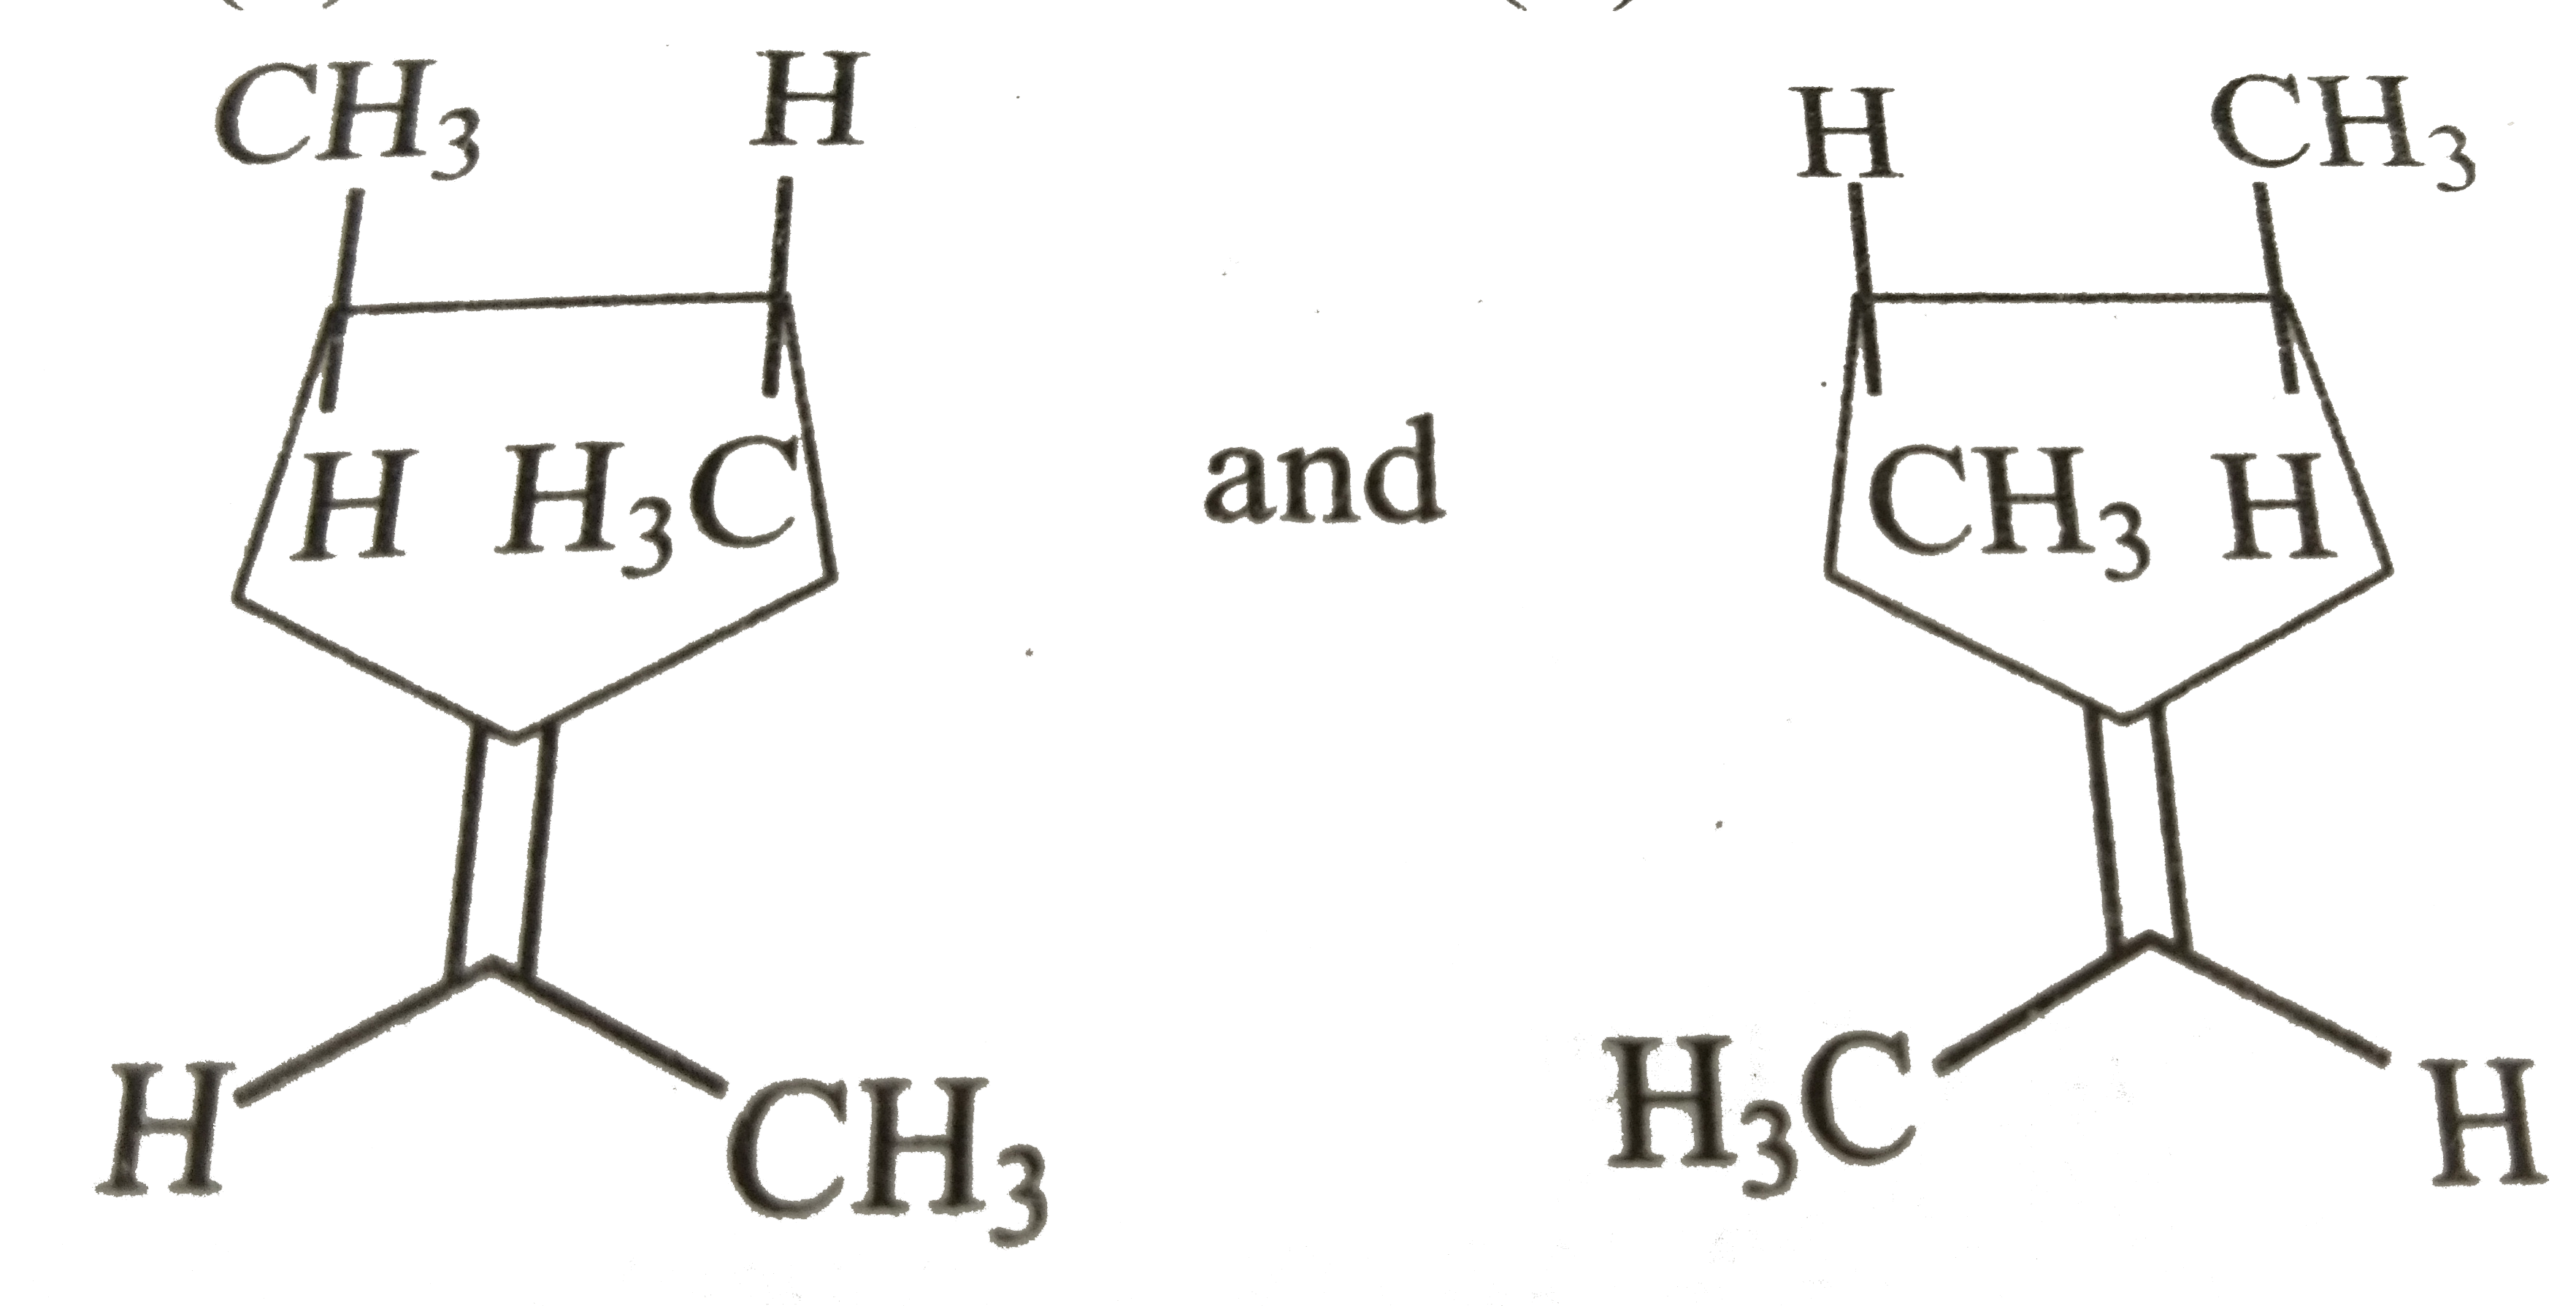 What is iupac name of the following compound